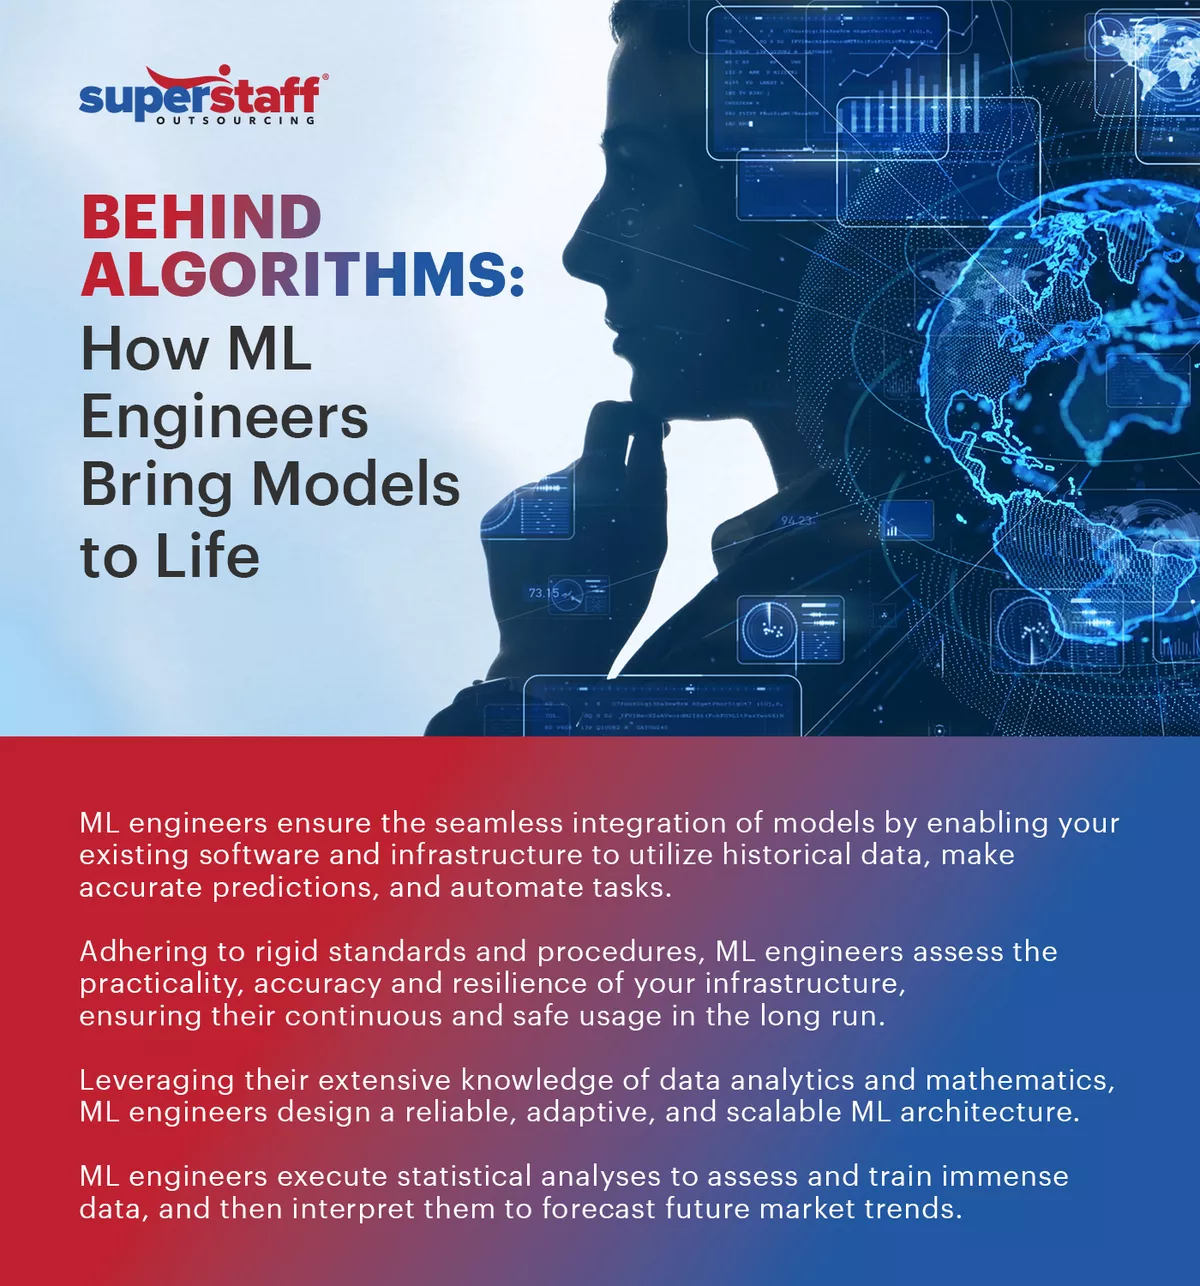 An infographic describing how machine learning engineers bring AI models to life.